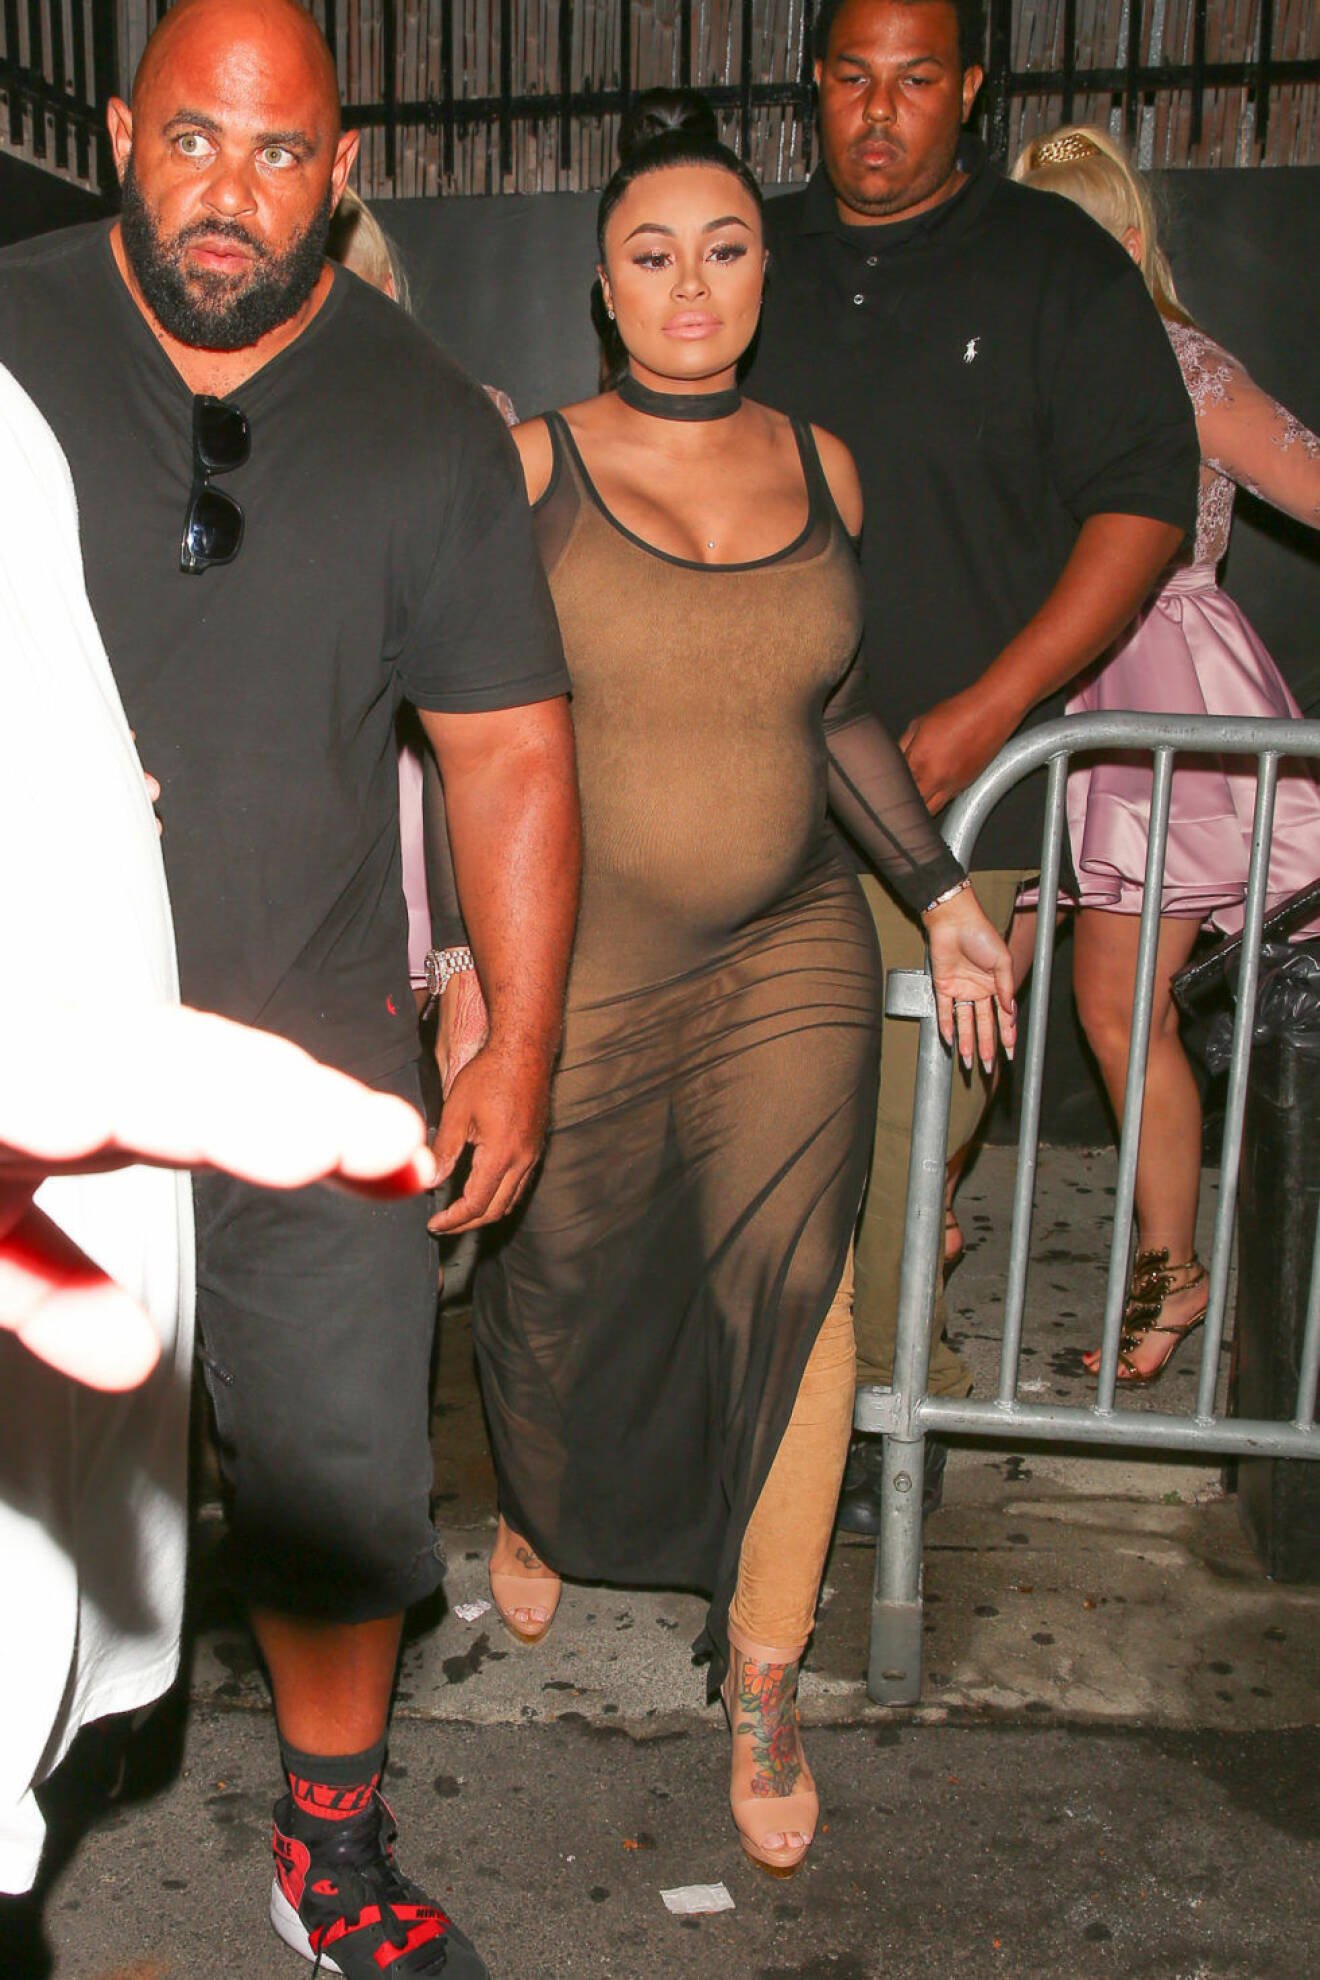 Pregnant Blac Chyna leaving Penthouse Nightclub with Shannon Twins